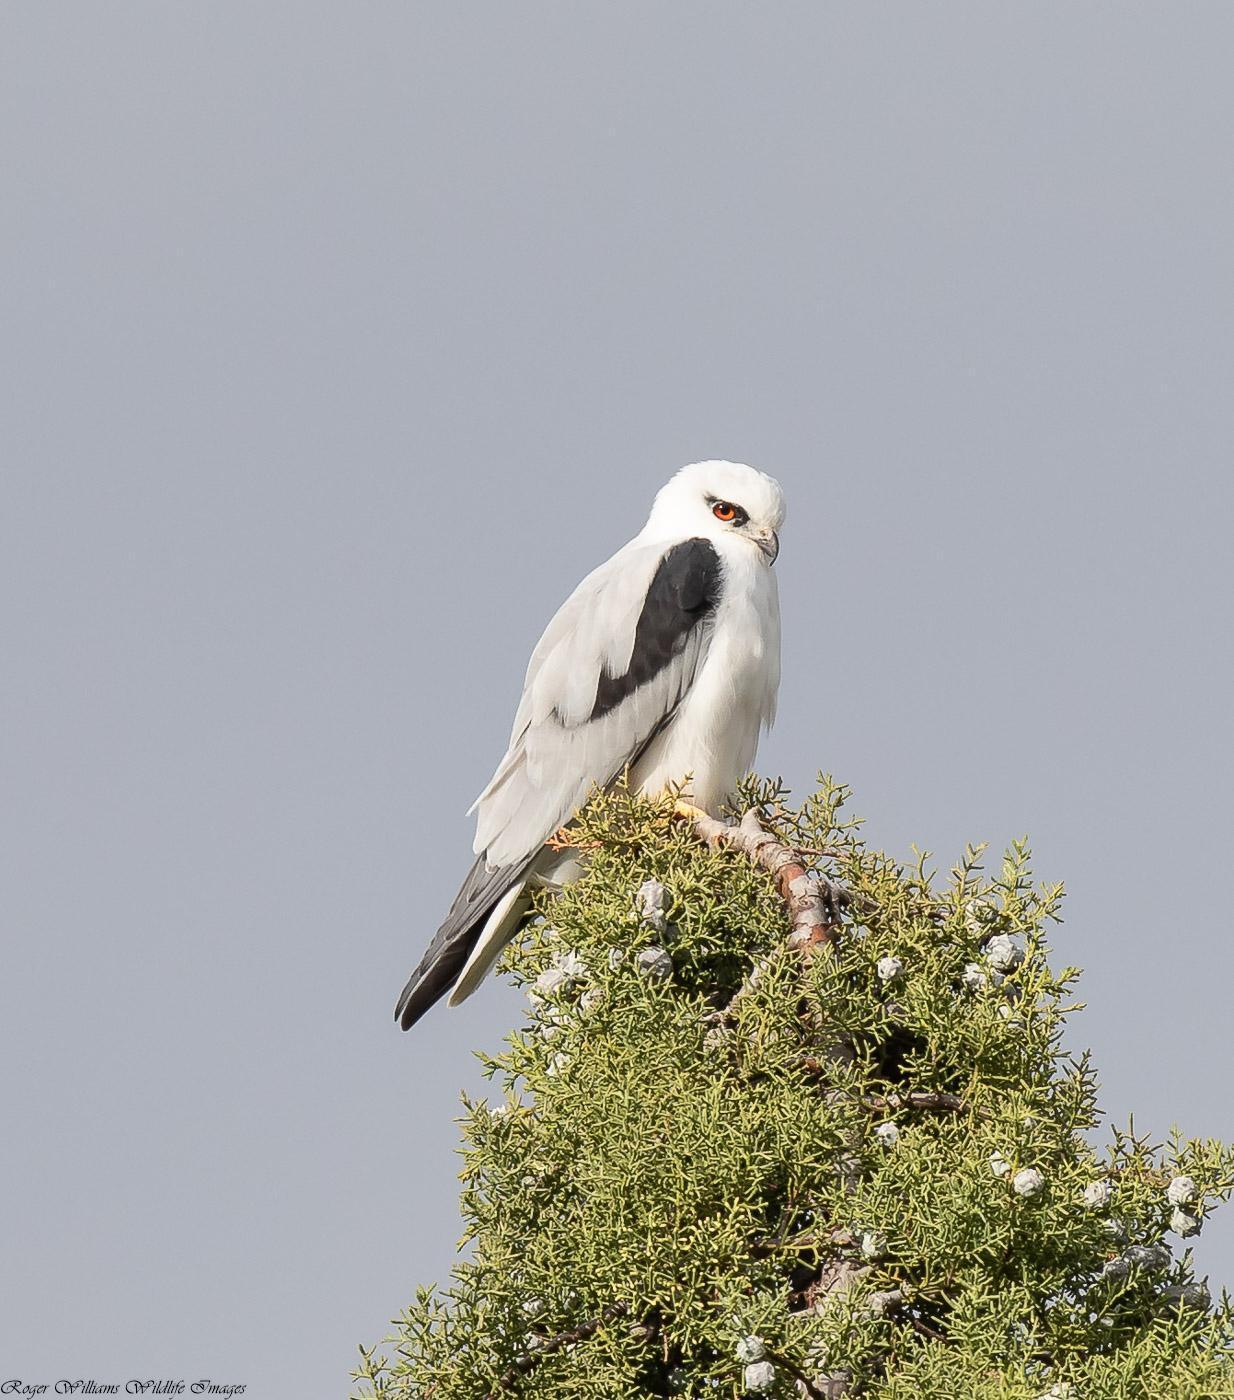 Black-shouldered Kite Photo by Roger Williams